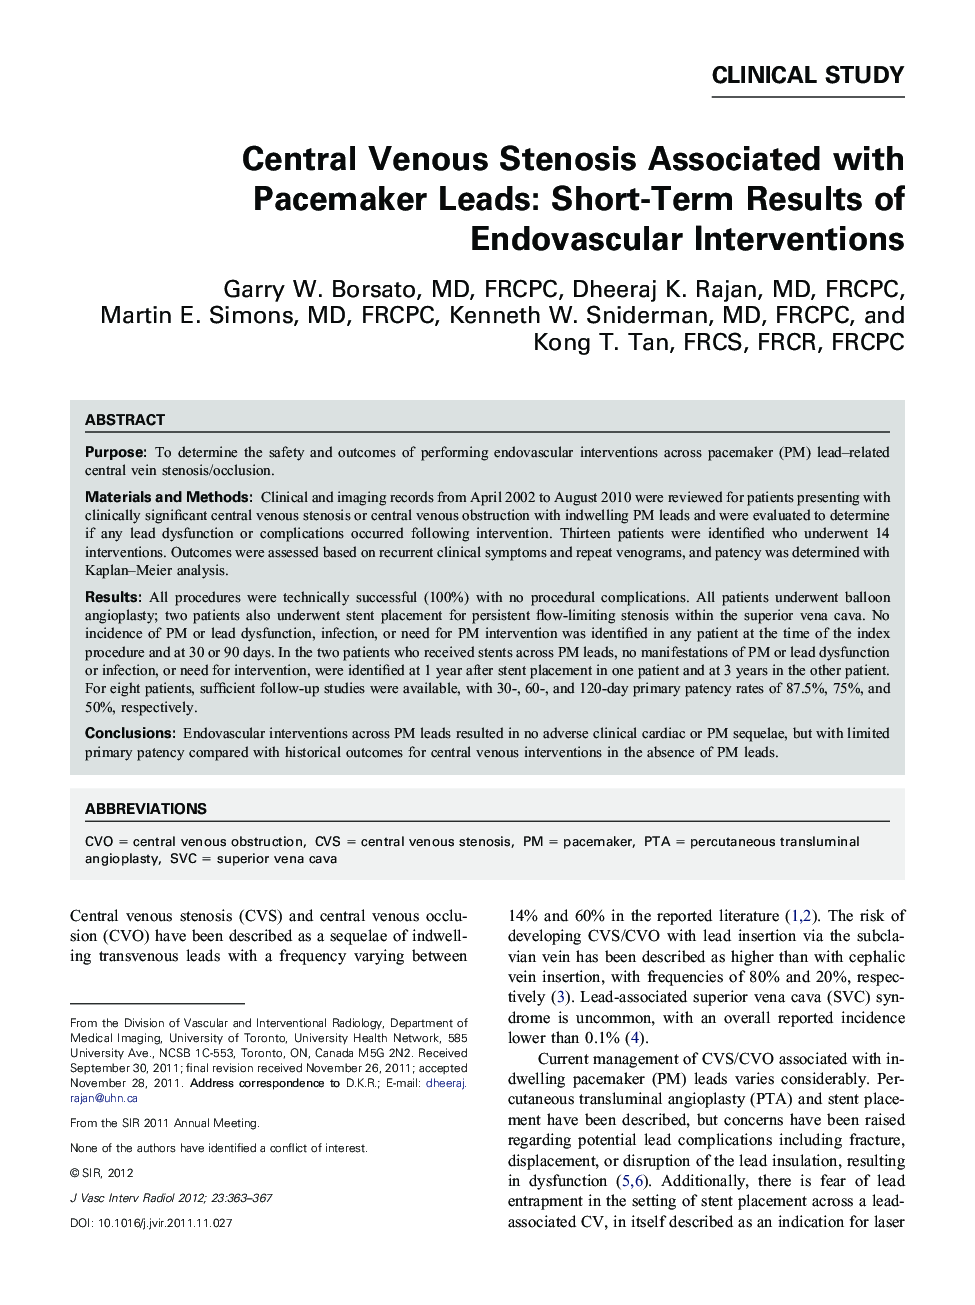 Central Venous Stenosis Associated with Pacemaker Leads: Short-Term Results of Endovascular Interventions